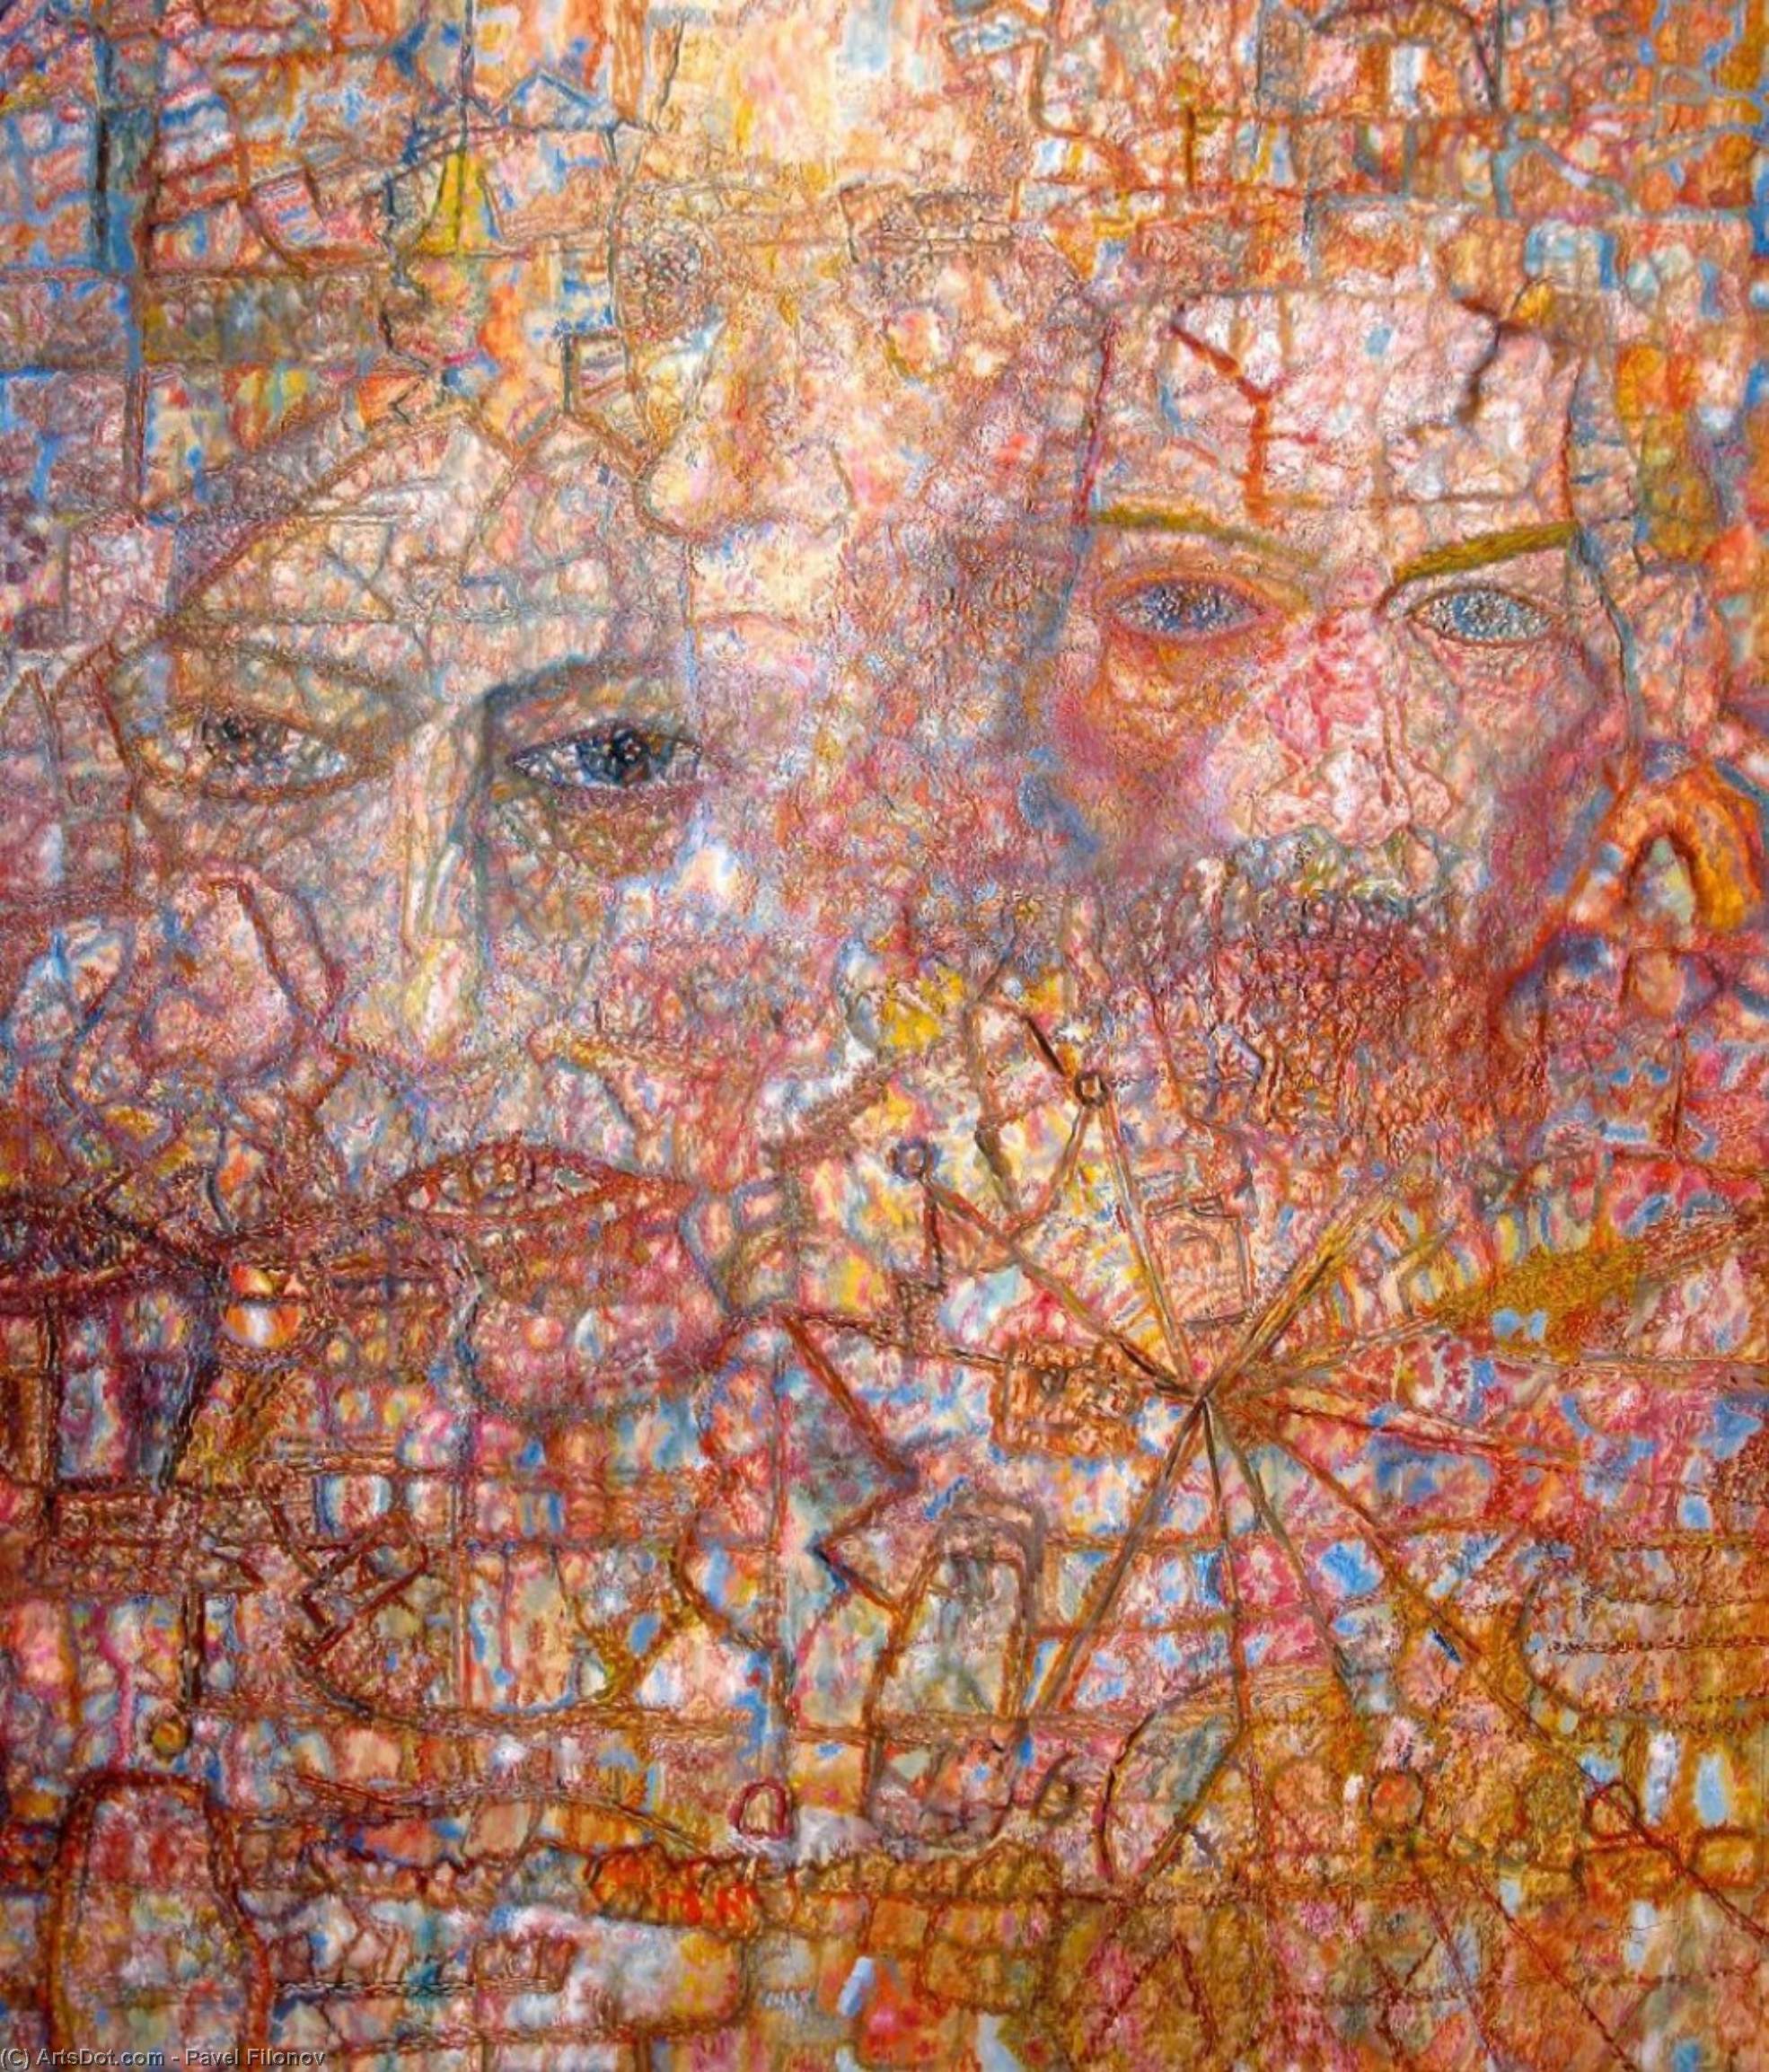 Countenances (Faces on an Icon) by Pavel Filonov - 1940 - 64 x 56 cm State Russian Museum